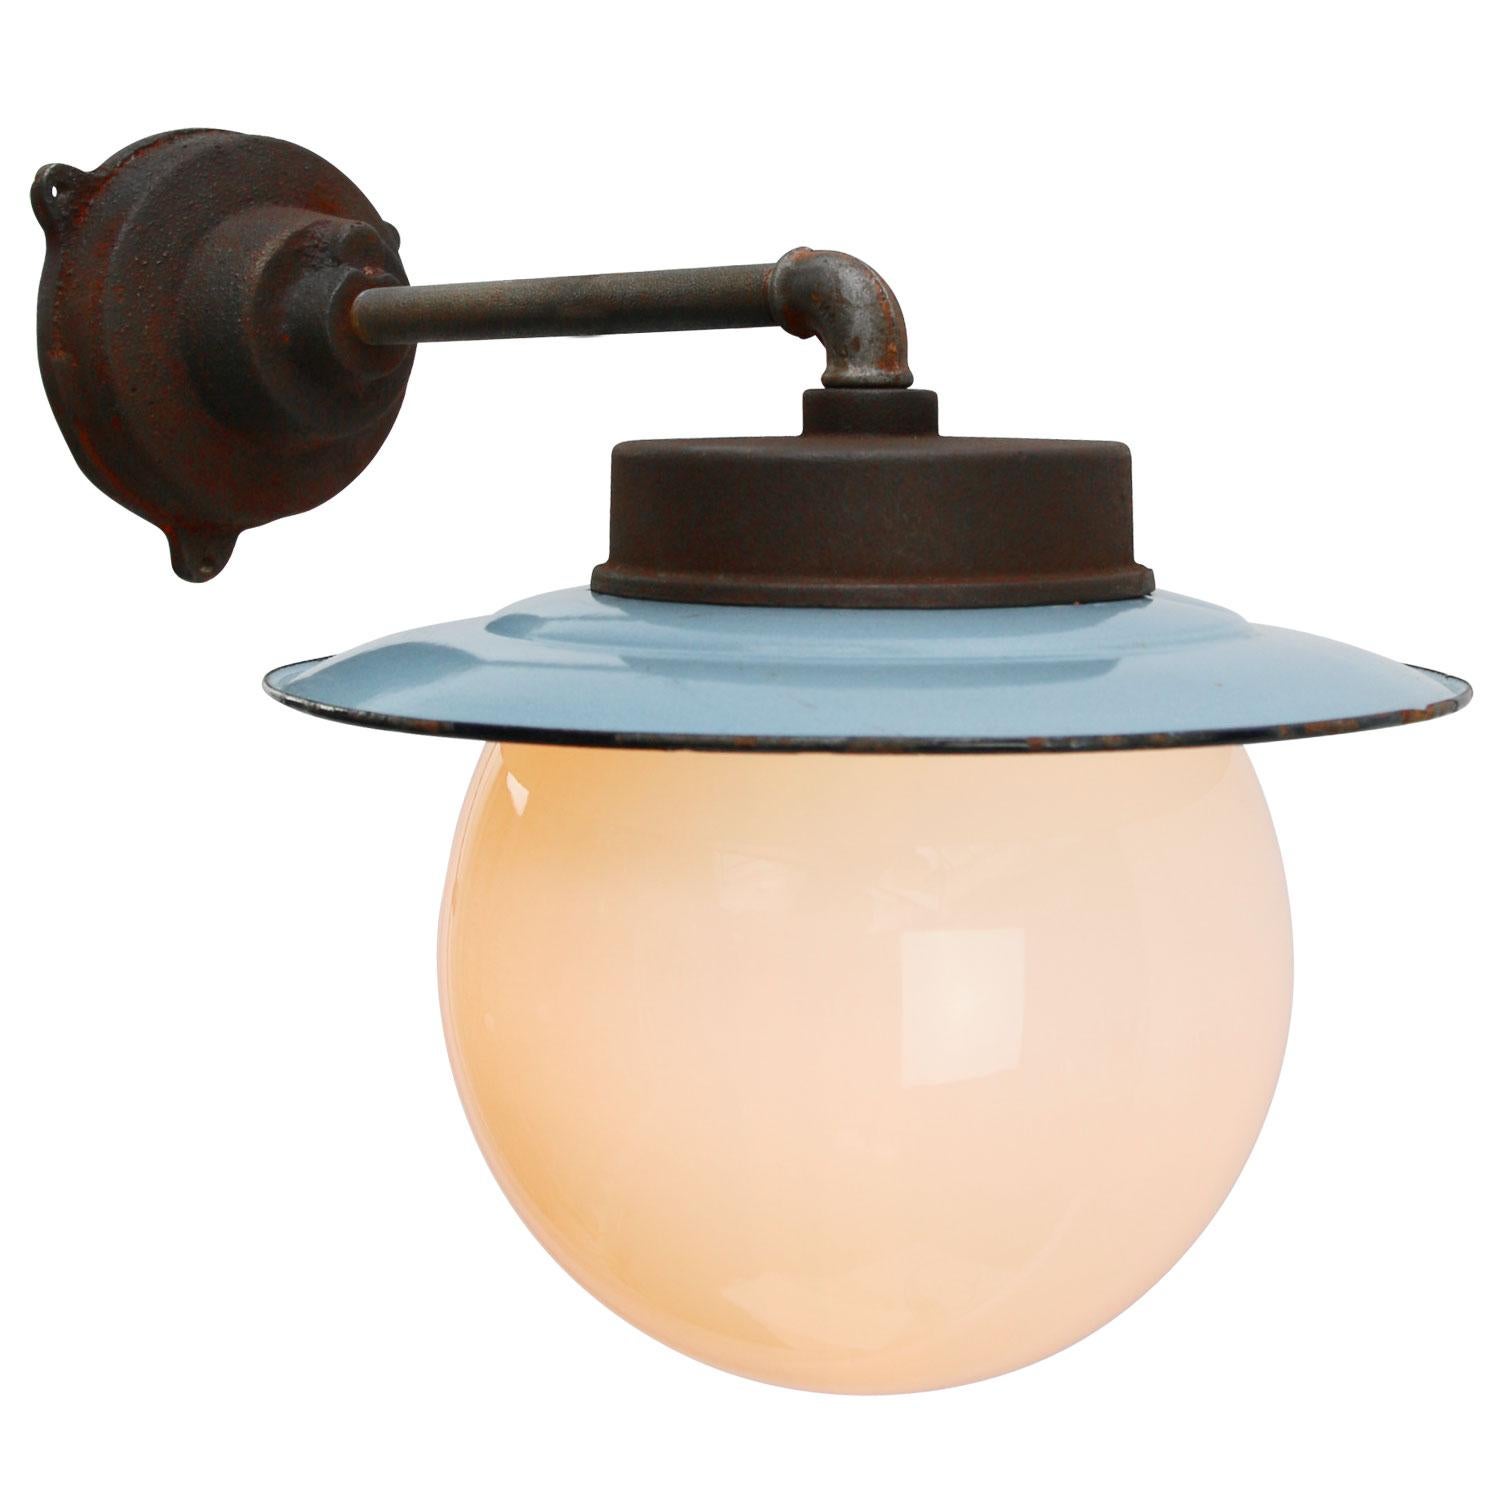 Blue enamel industrial wall light.
Opaline glass. Measures: 

Diameter cast iron wall piece: 12 cm. Three holes to secure.

Weight: 6.5 kg / 14.3 lb

All lamps have been made suitable by international standards for incandescent light bulbs,